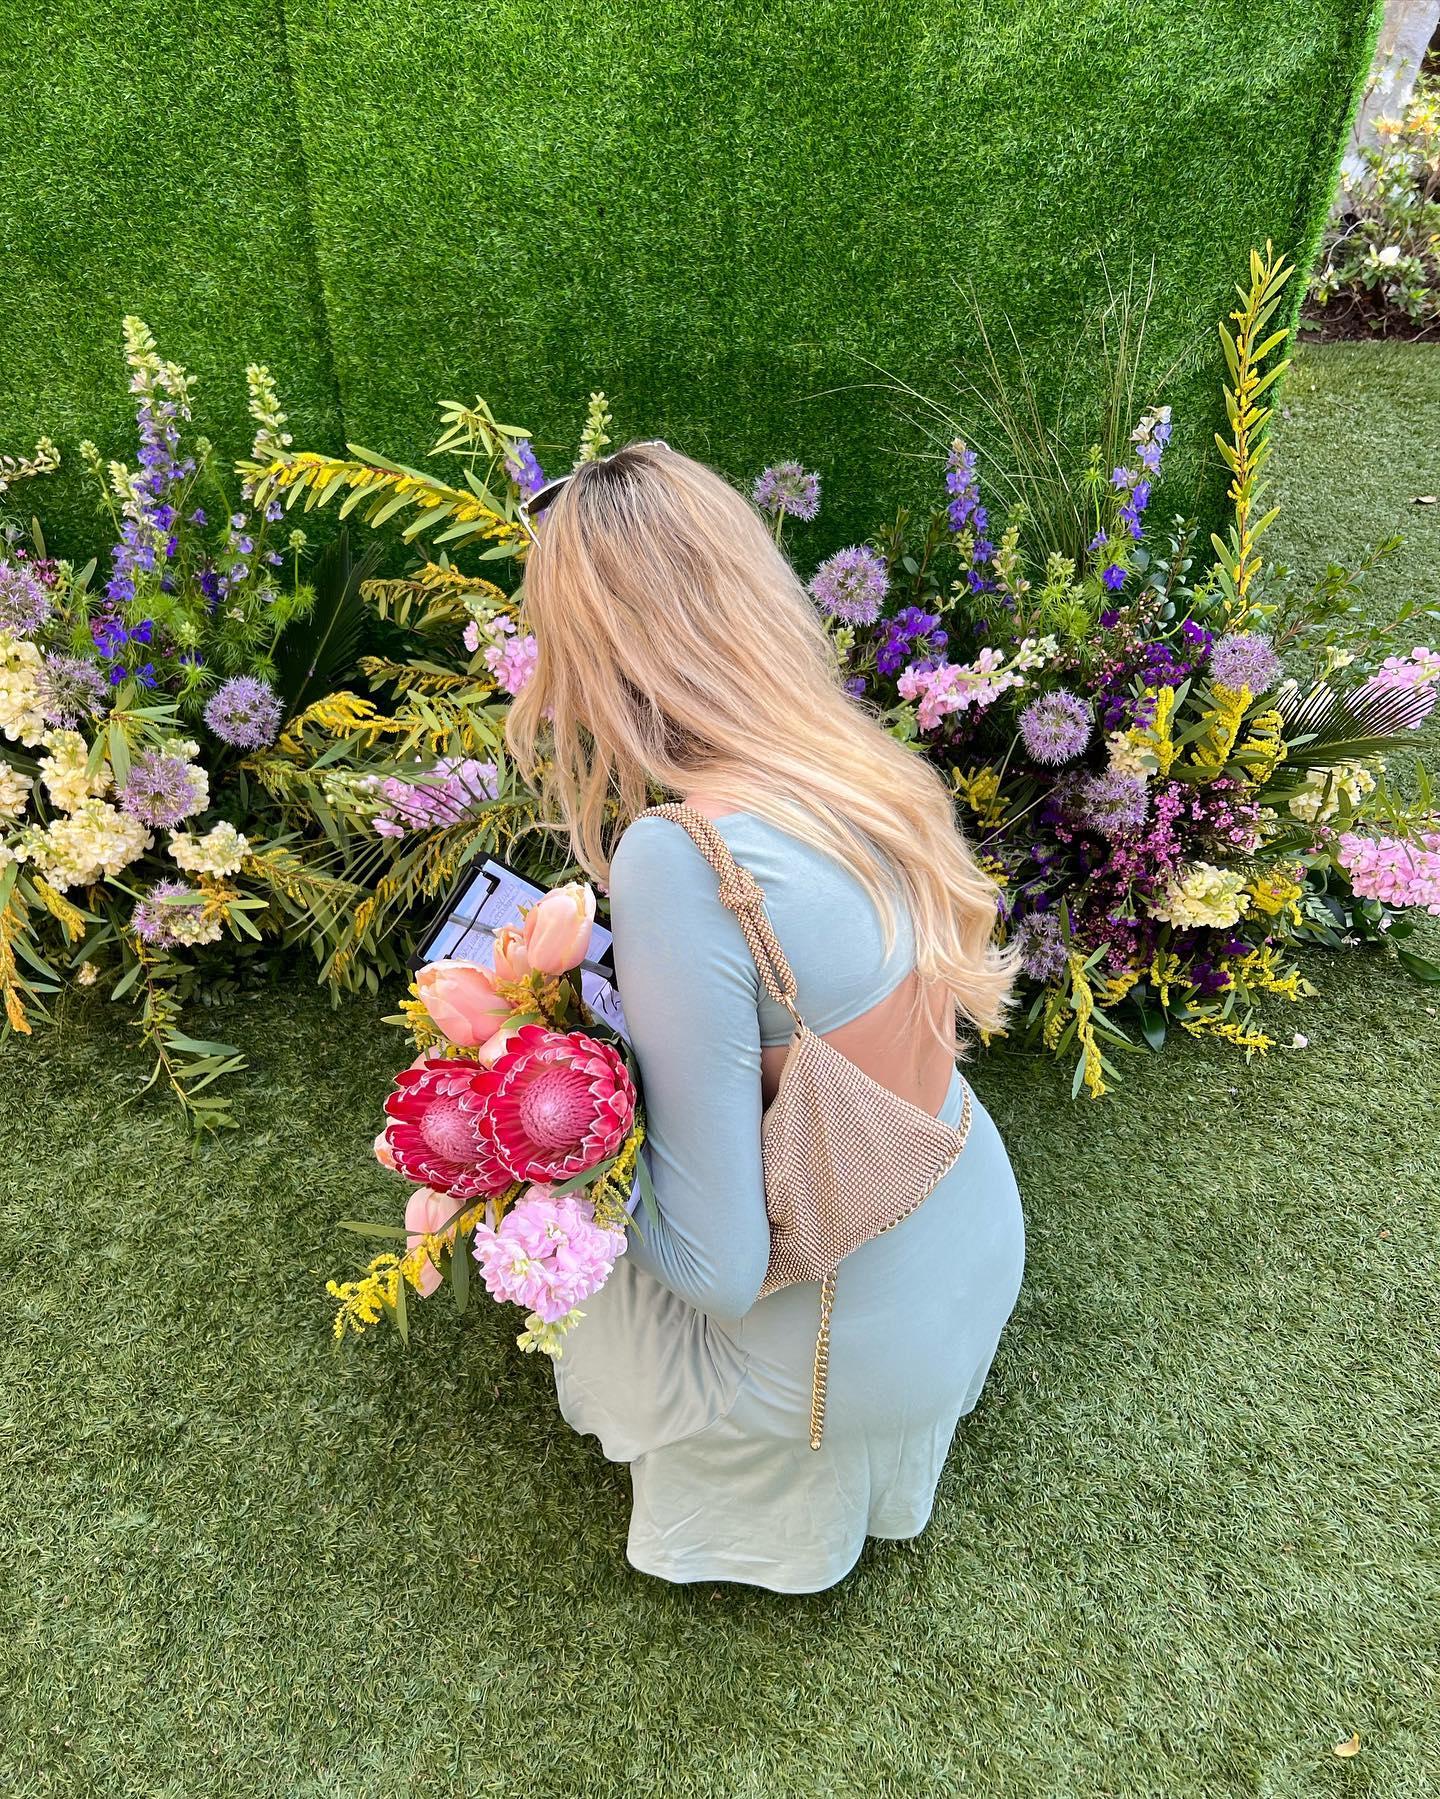 Carly Lawrence picks flowers in a green dress